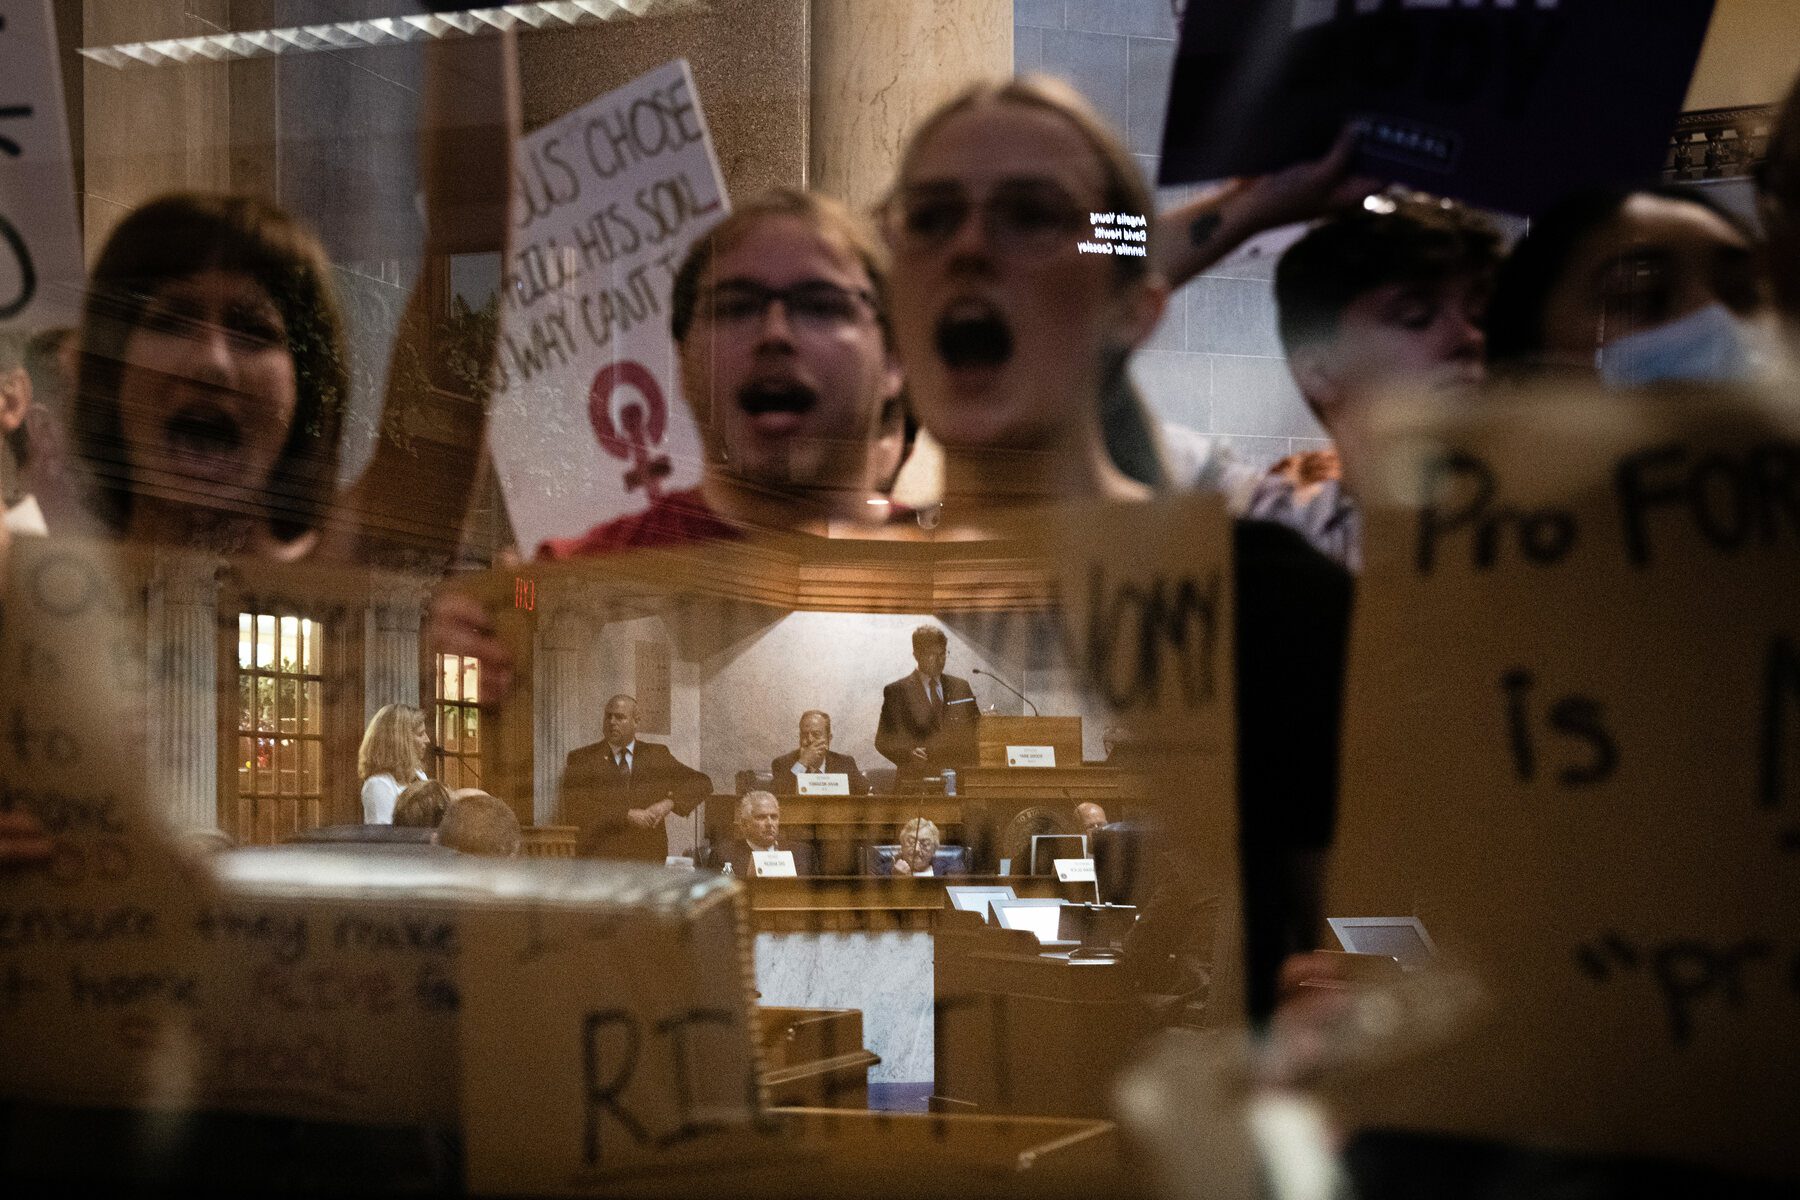 Protestors hold signs and look through a viewing window at the Indiana Capitol building.